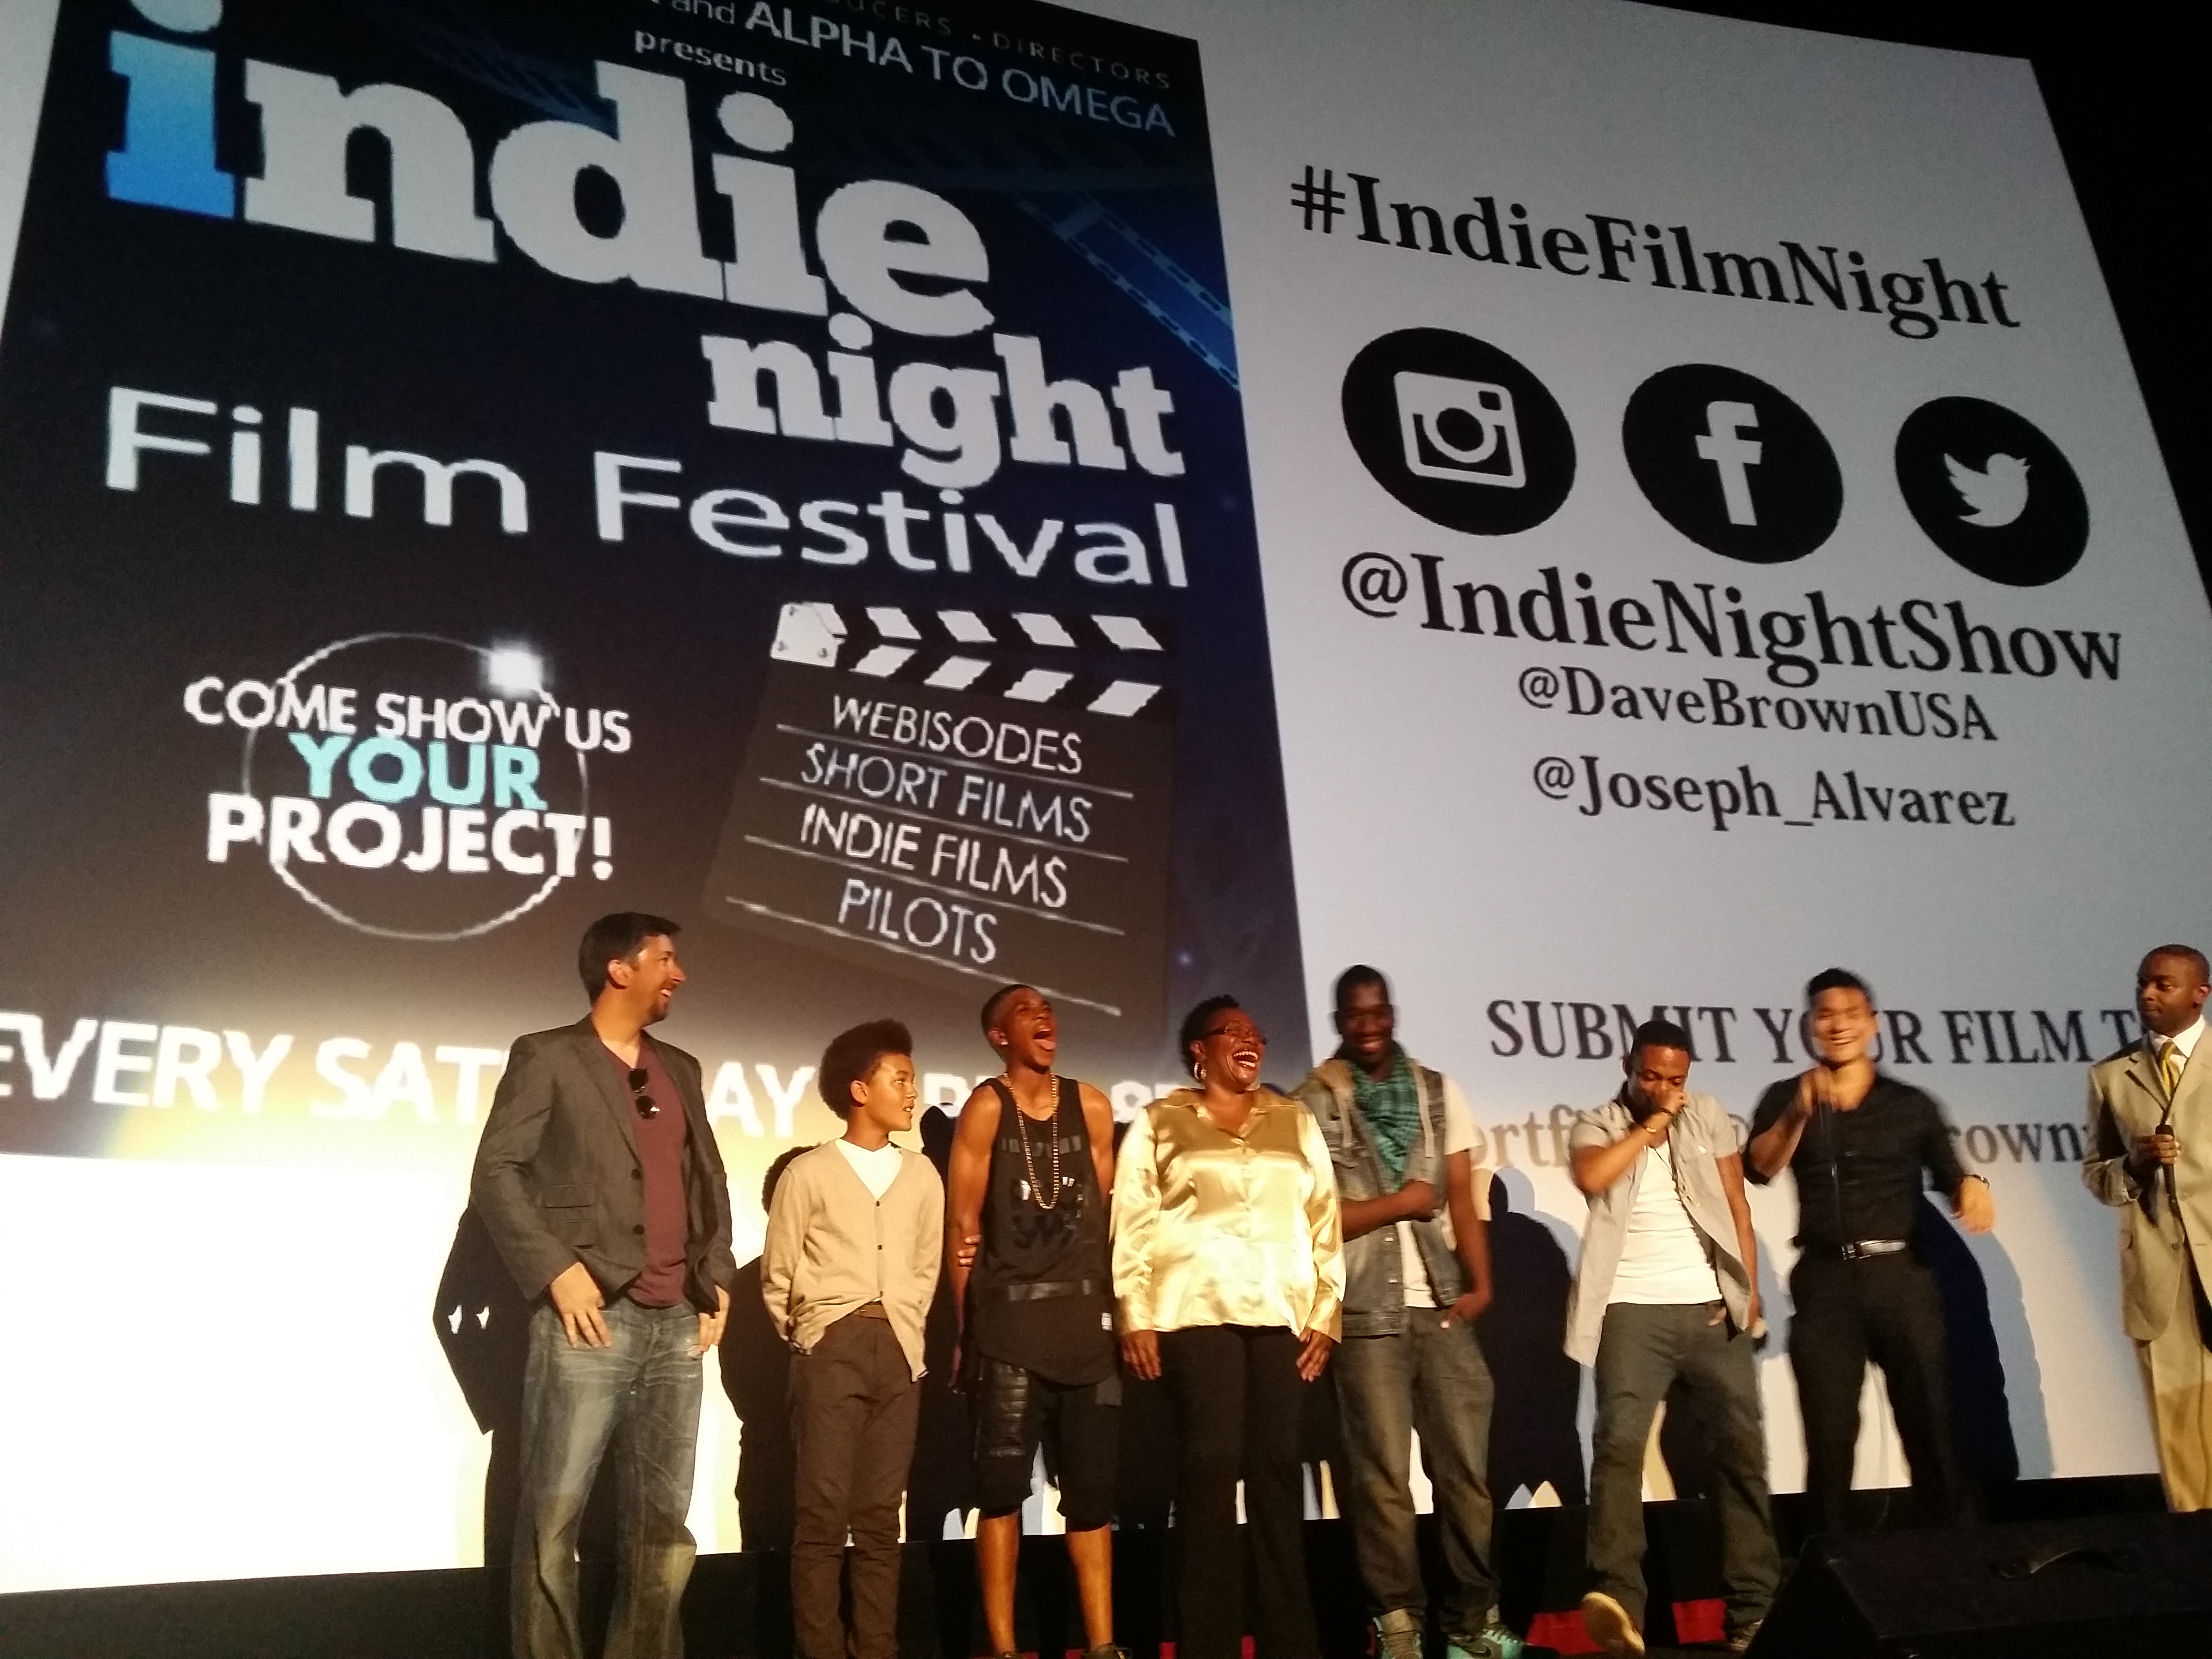 Screening of Color Lines at indie night at Chinese Man Theater